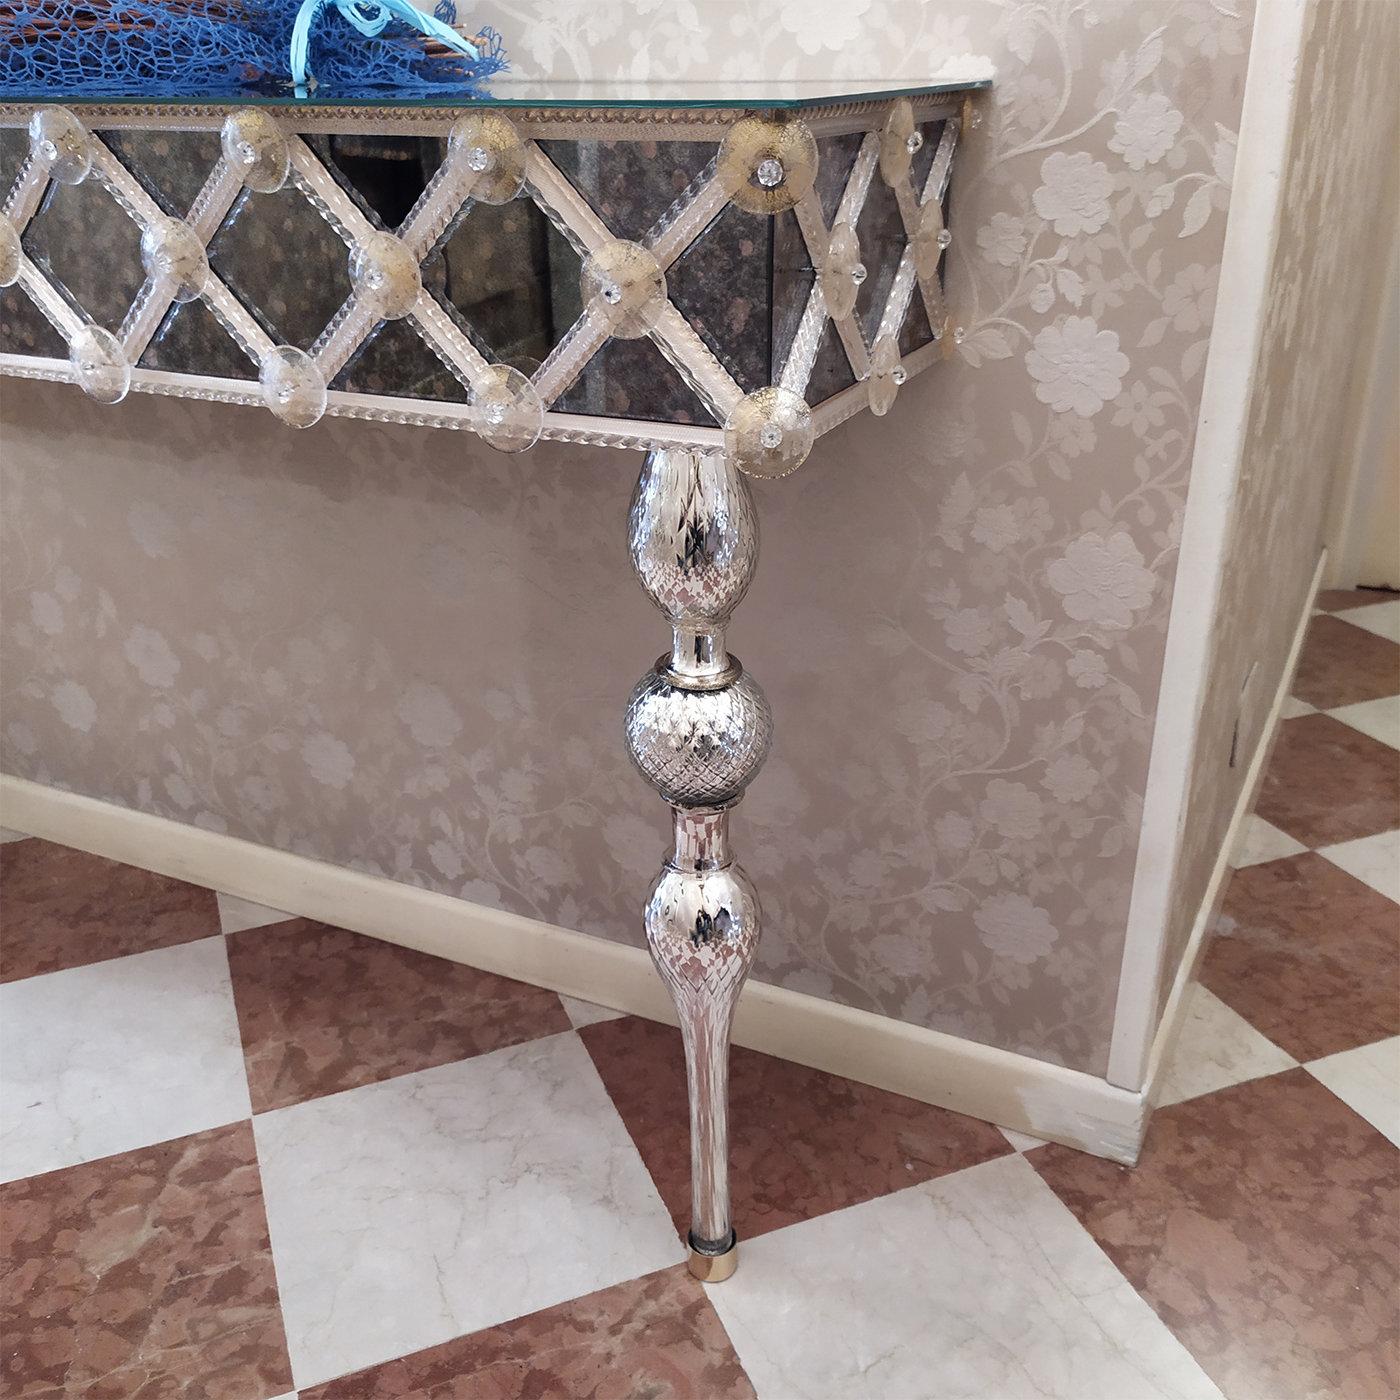 A sublime showcase of craftsmanship by expert artisans of the Venetian glassmaking tradition, this exceptional console will make a uniquely lavish accent in a refined entryway. Distinguished by meticulously applied details, it features a mirror top,